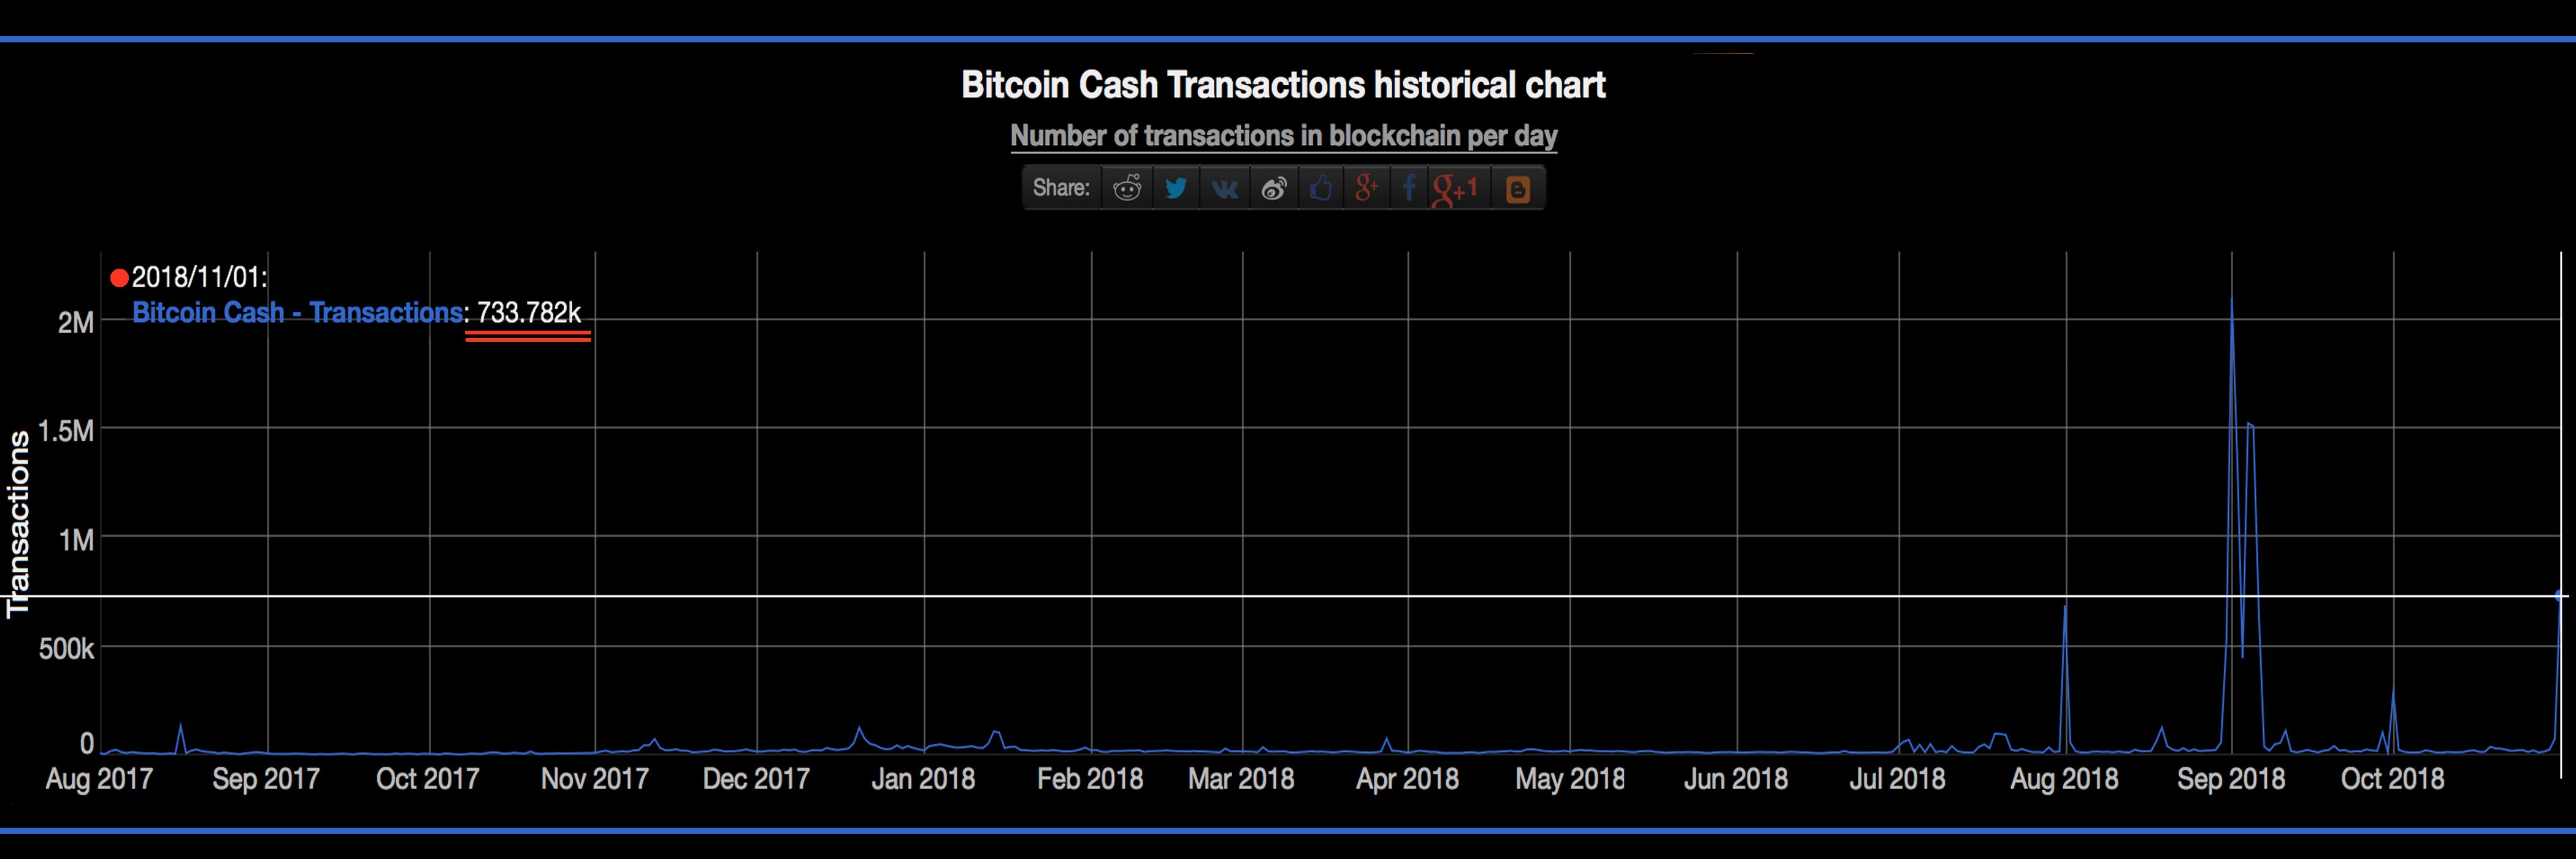 New Bitcoin Cash Stress Test Sees 700,000 Transactions in One Day